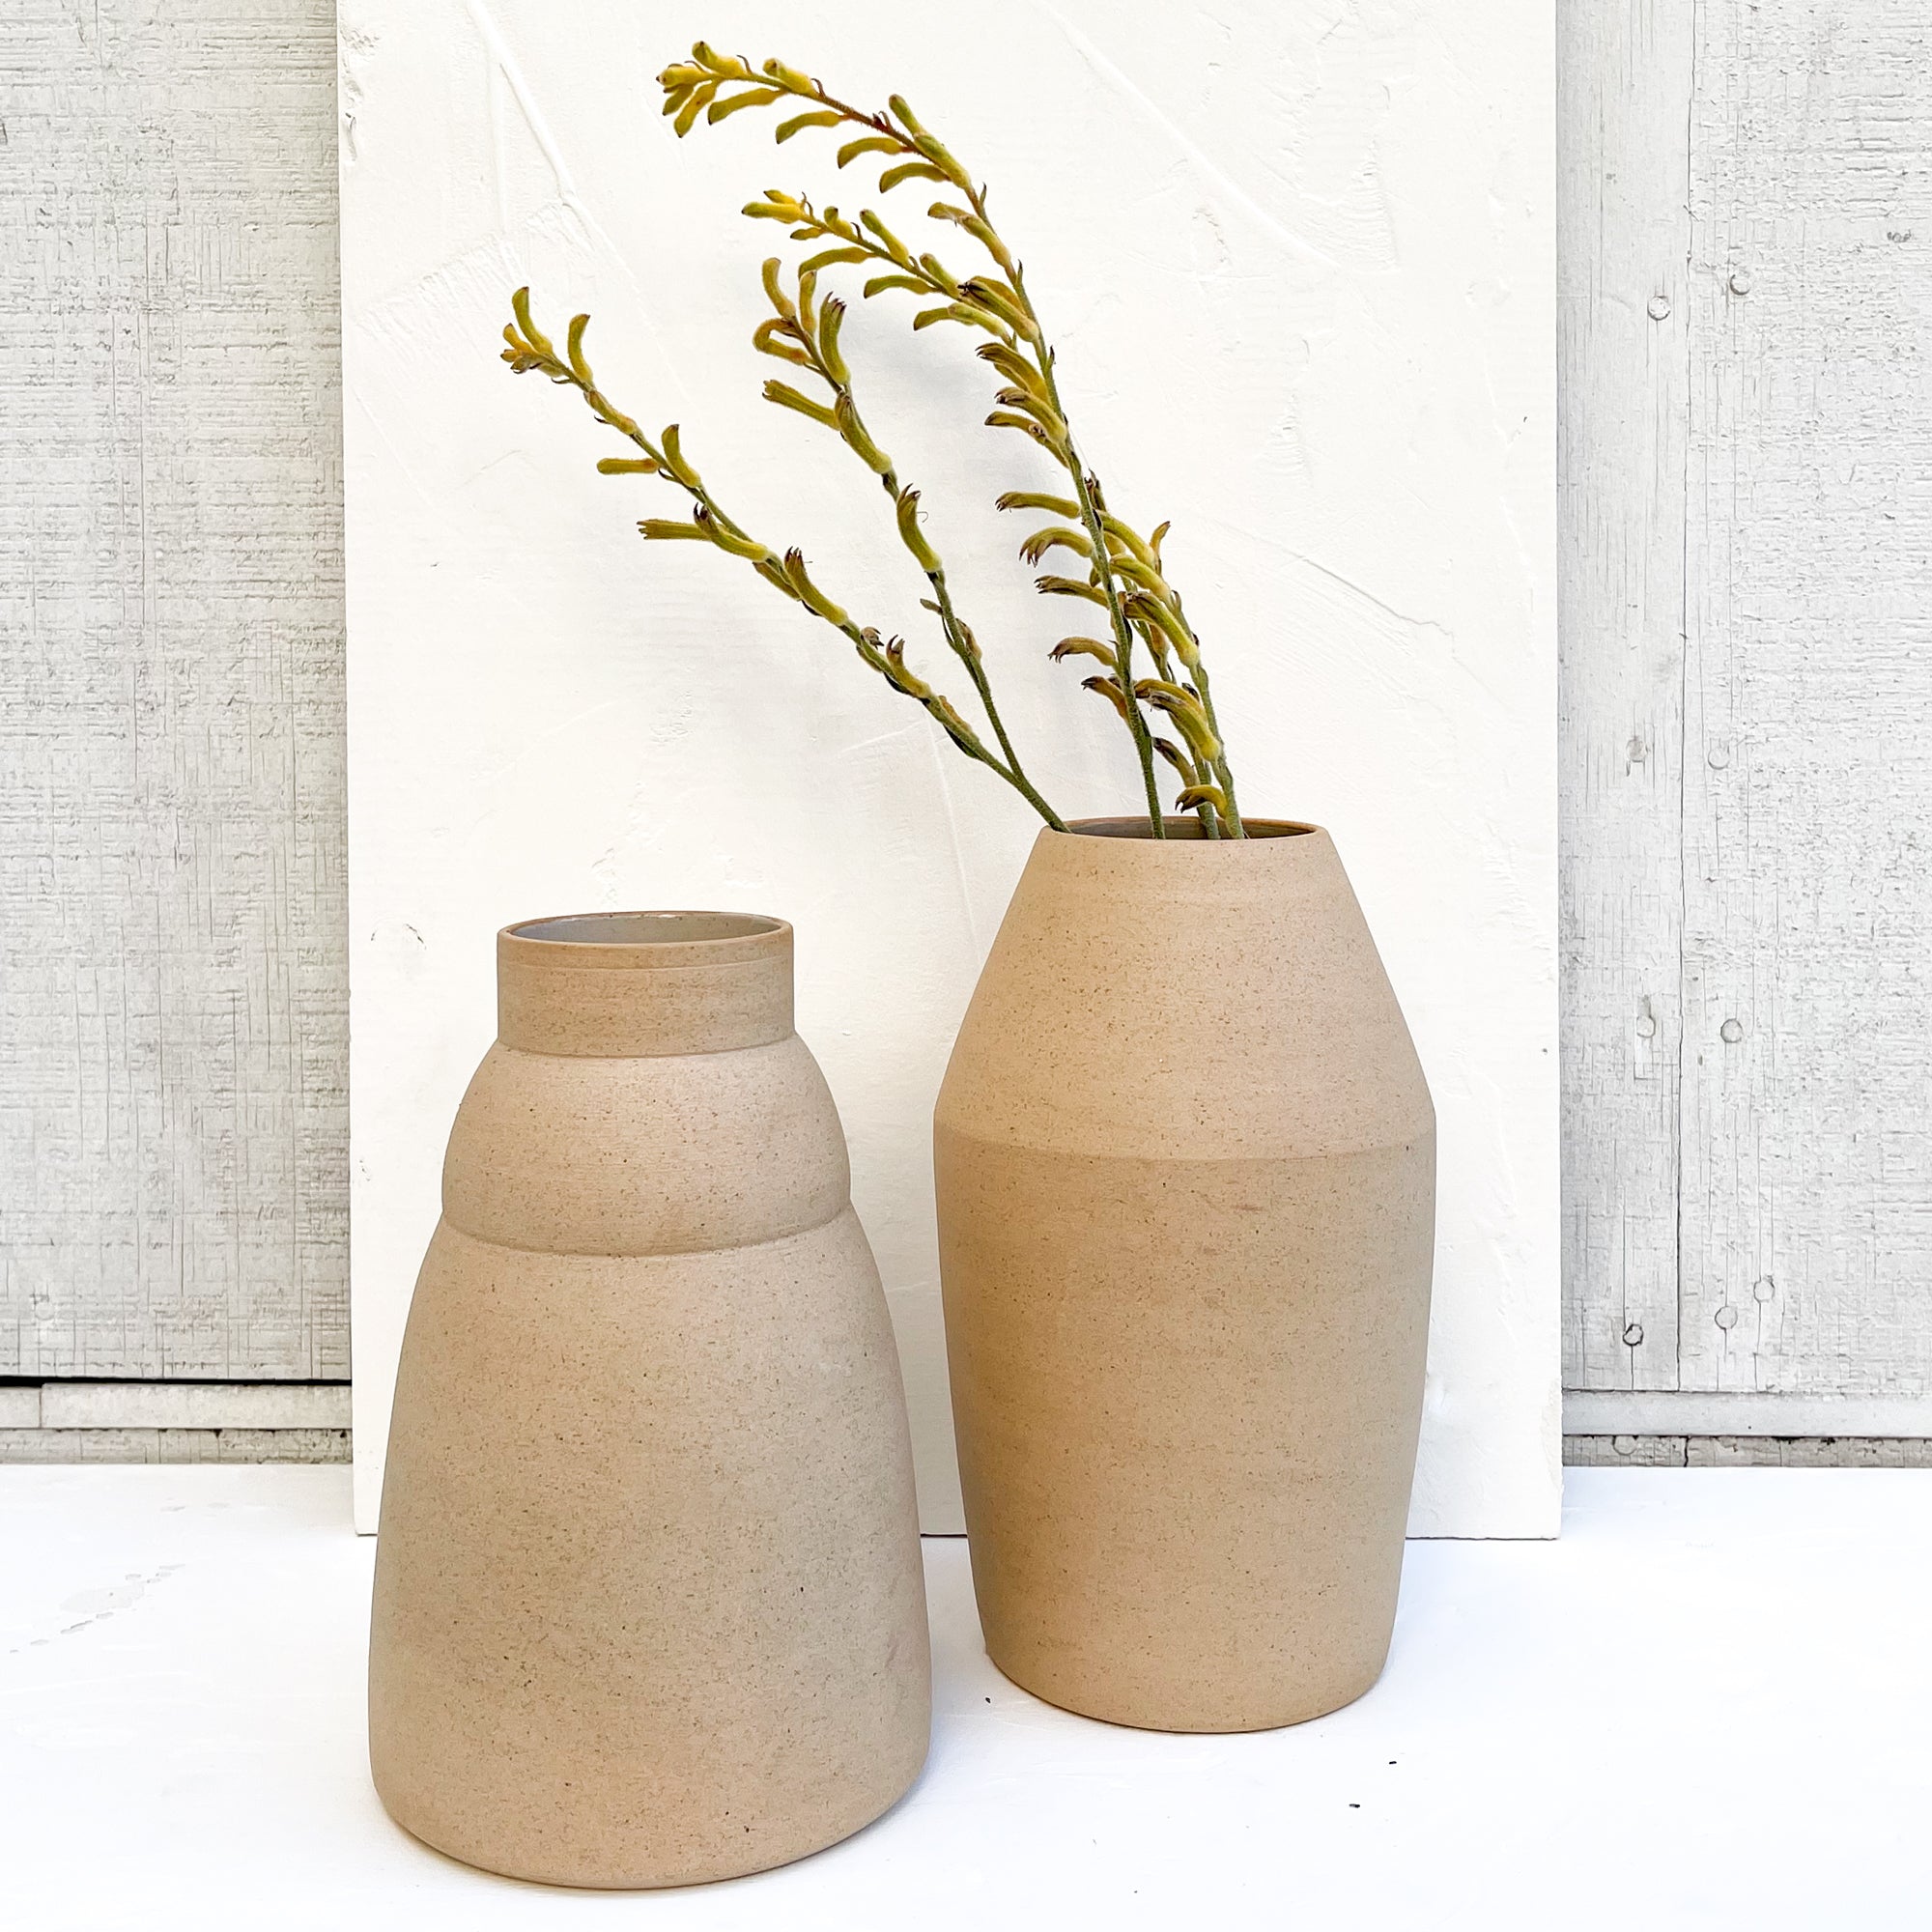 A pair of ceramic terra-cotta vases paired with dry floral stems.